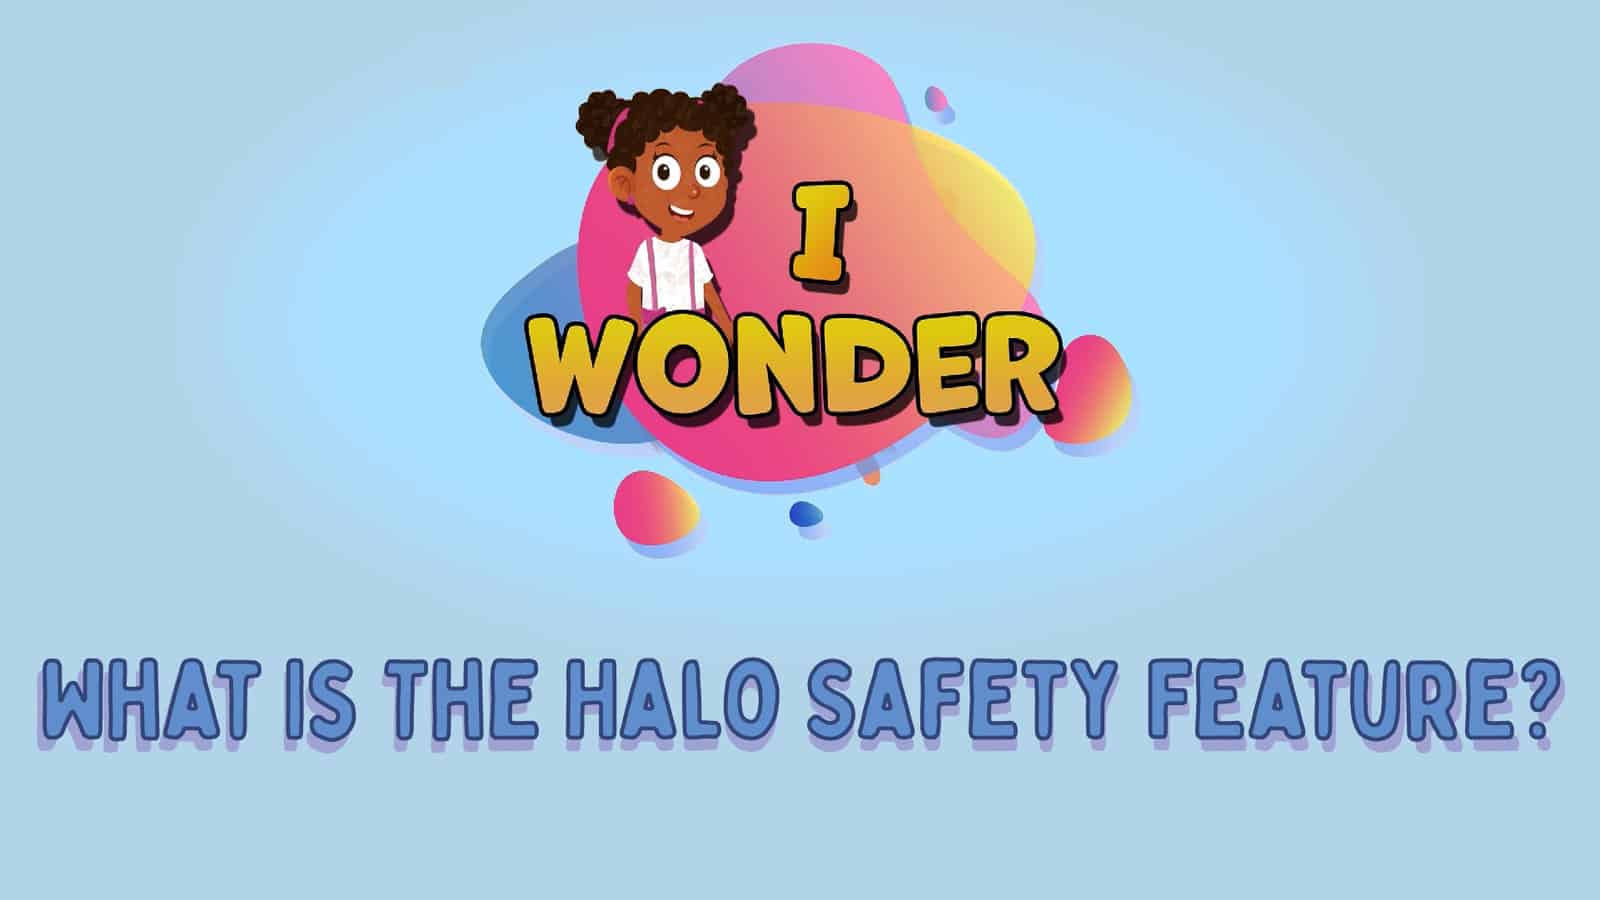 What Is The Halo Safety Feature?